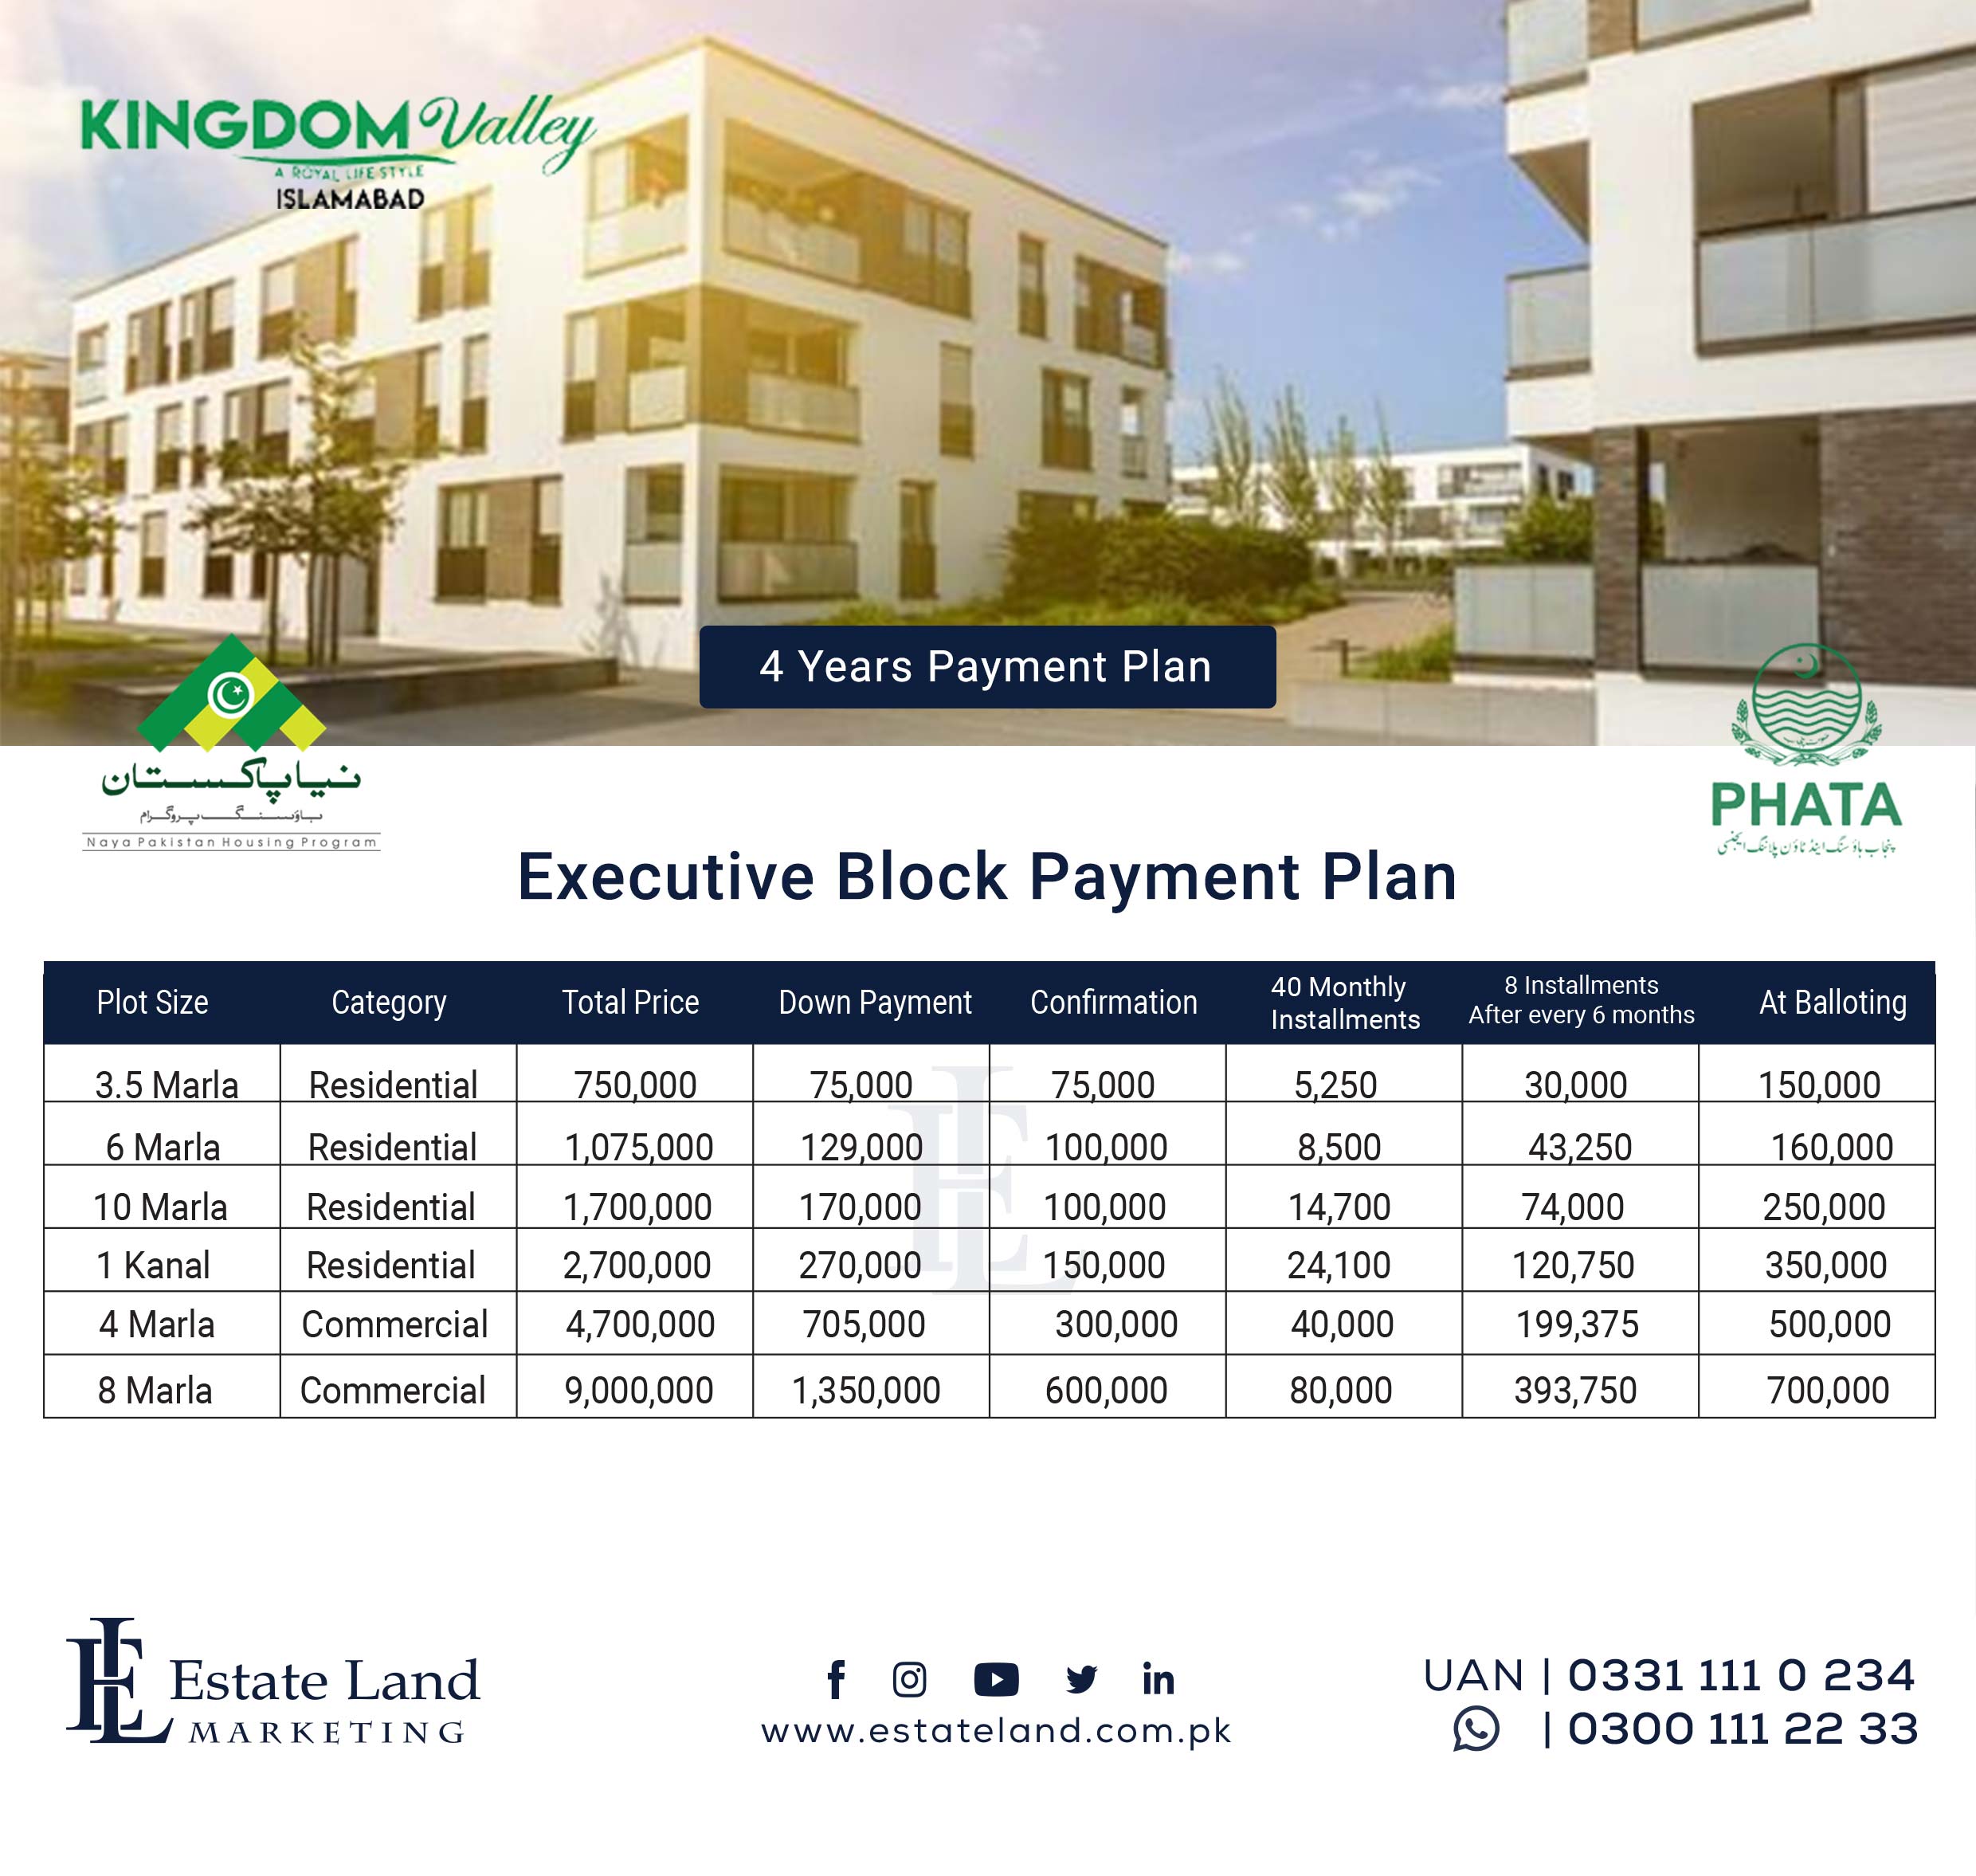 Executive Block Payment Plan of kingdom valley